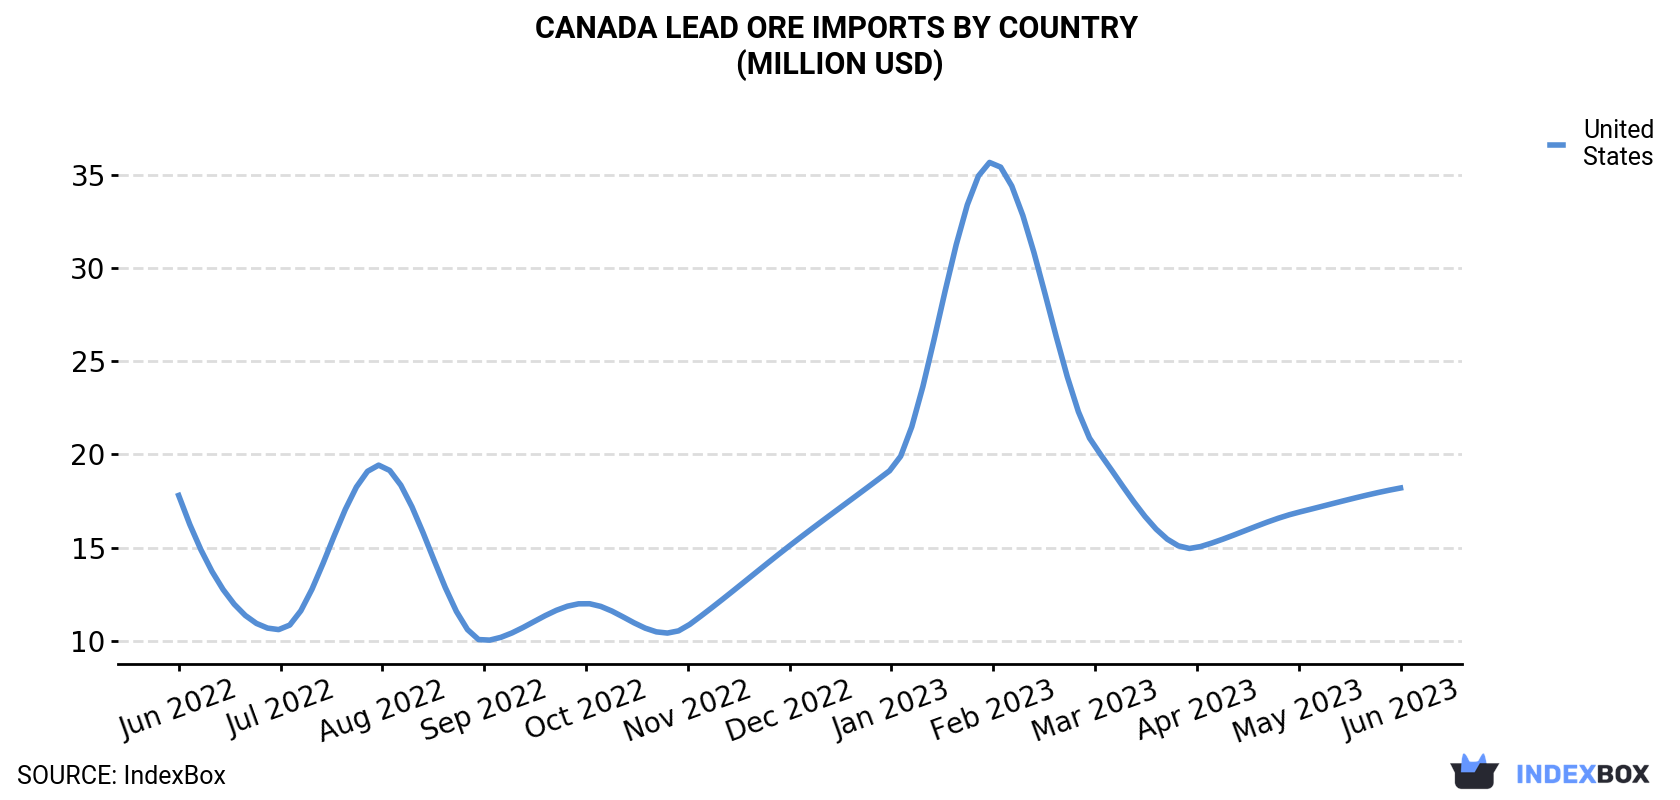 Canada Lead Ore Imports By Country (Million USD)